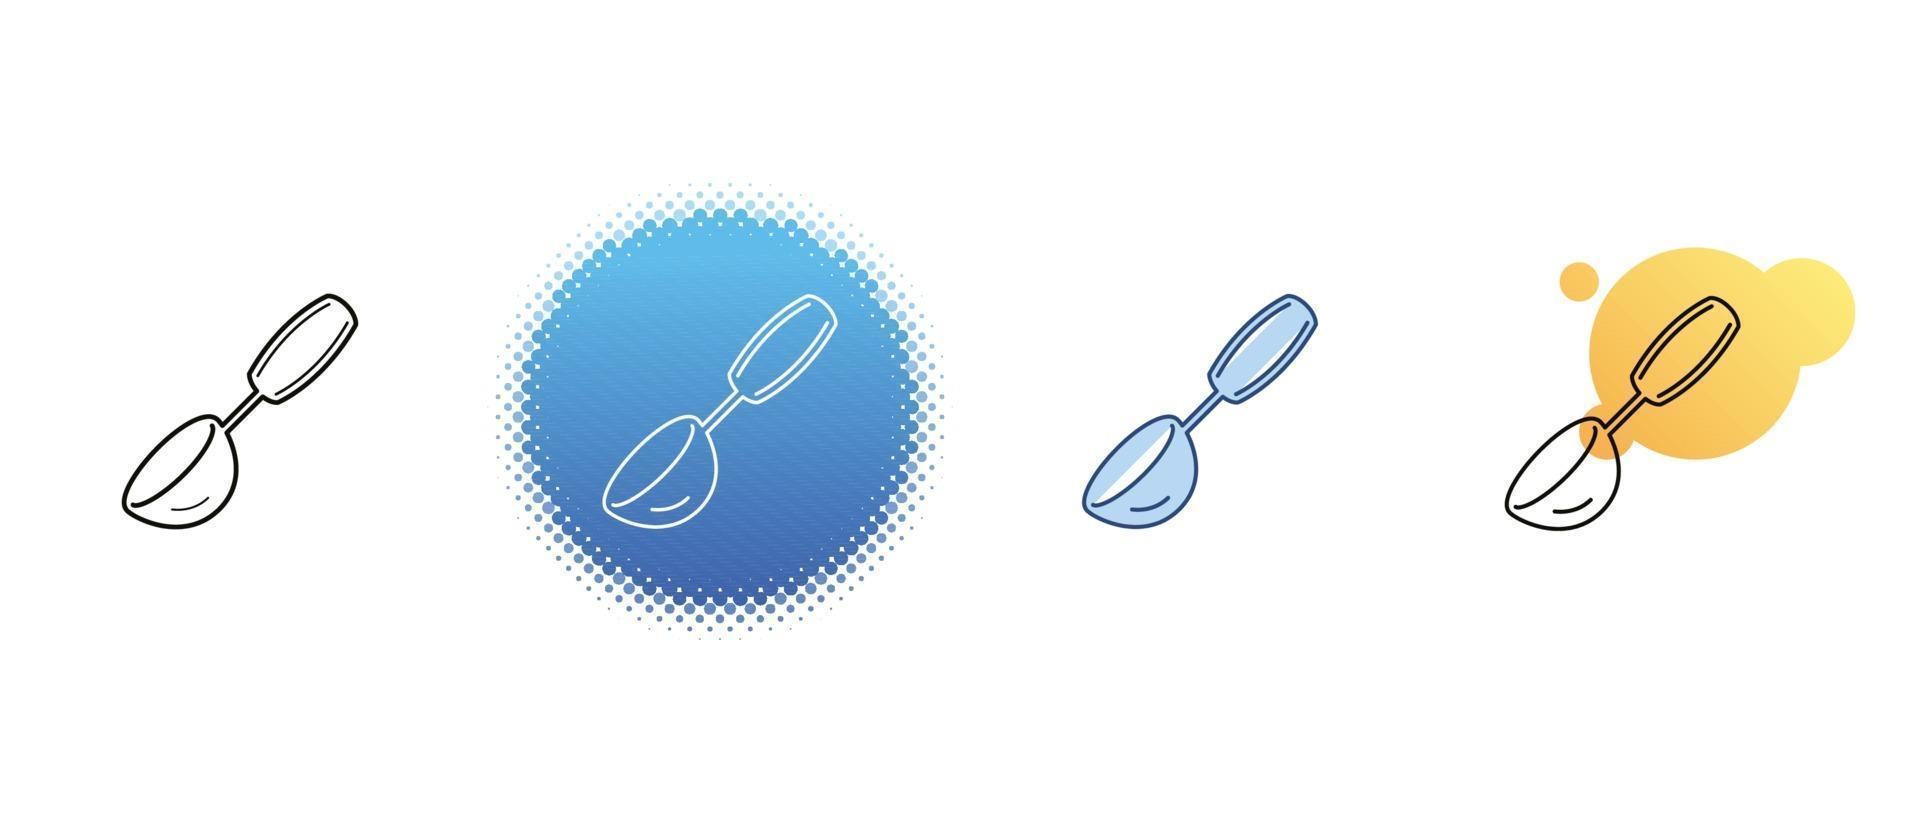 This is a set of contour and color icons ice cream spoon vector